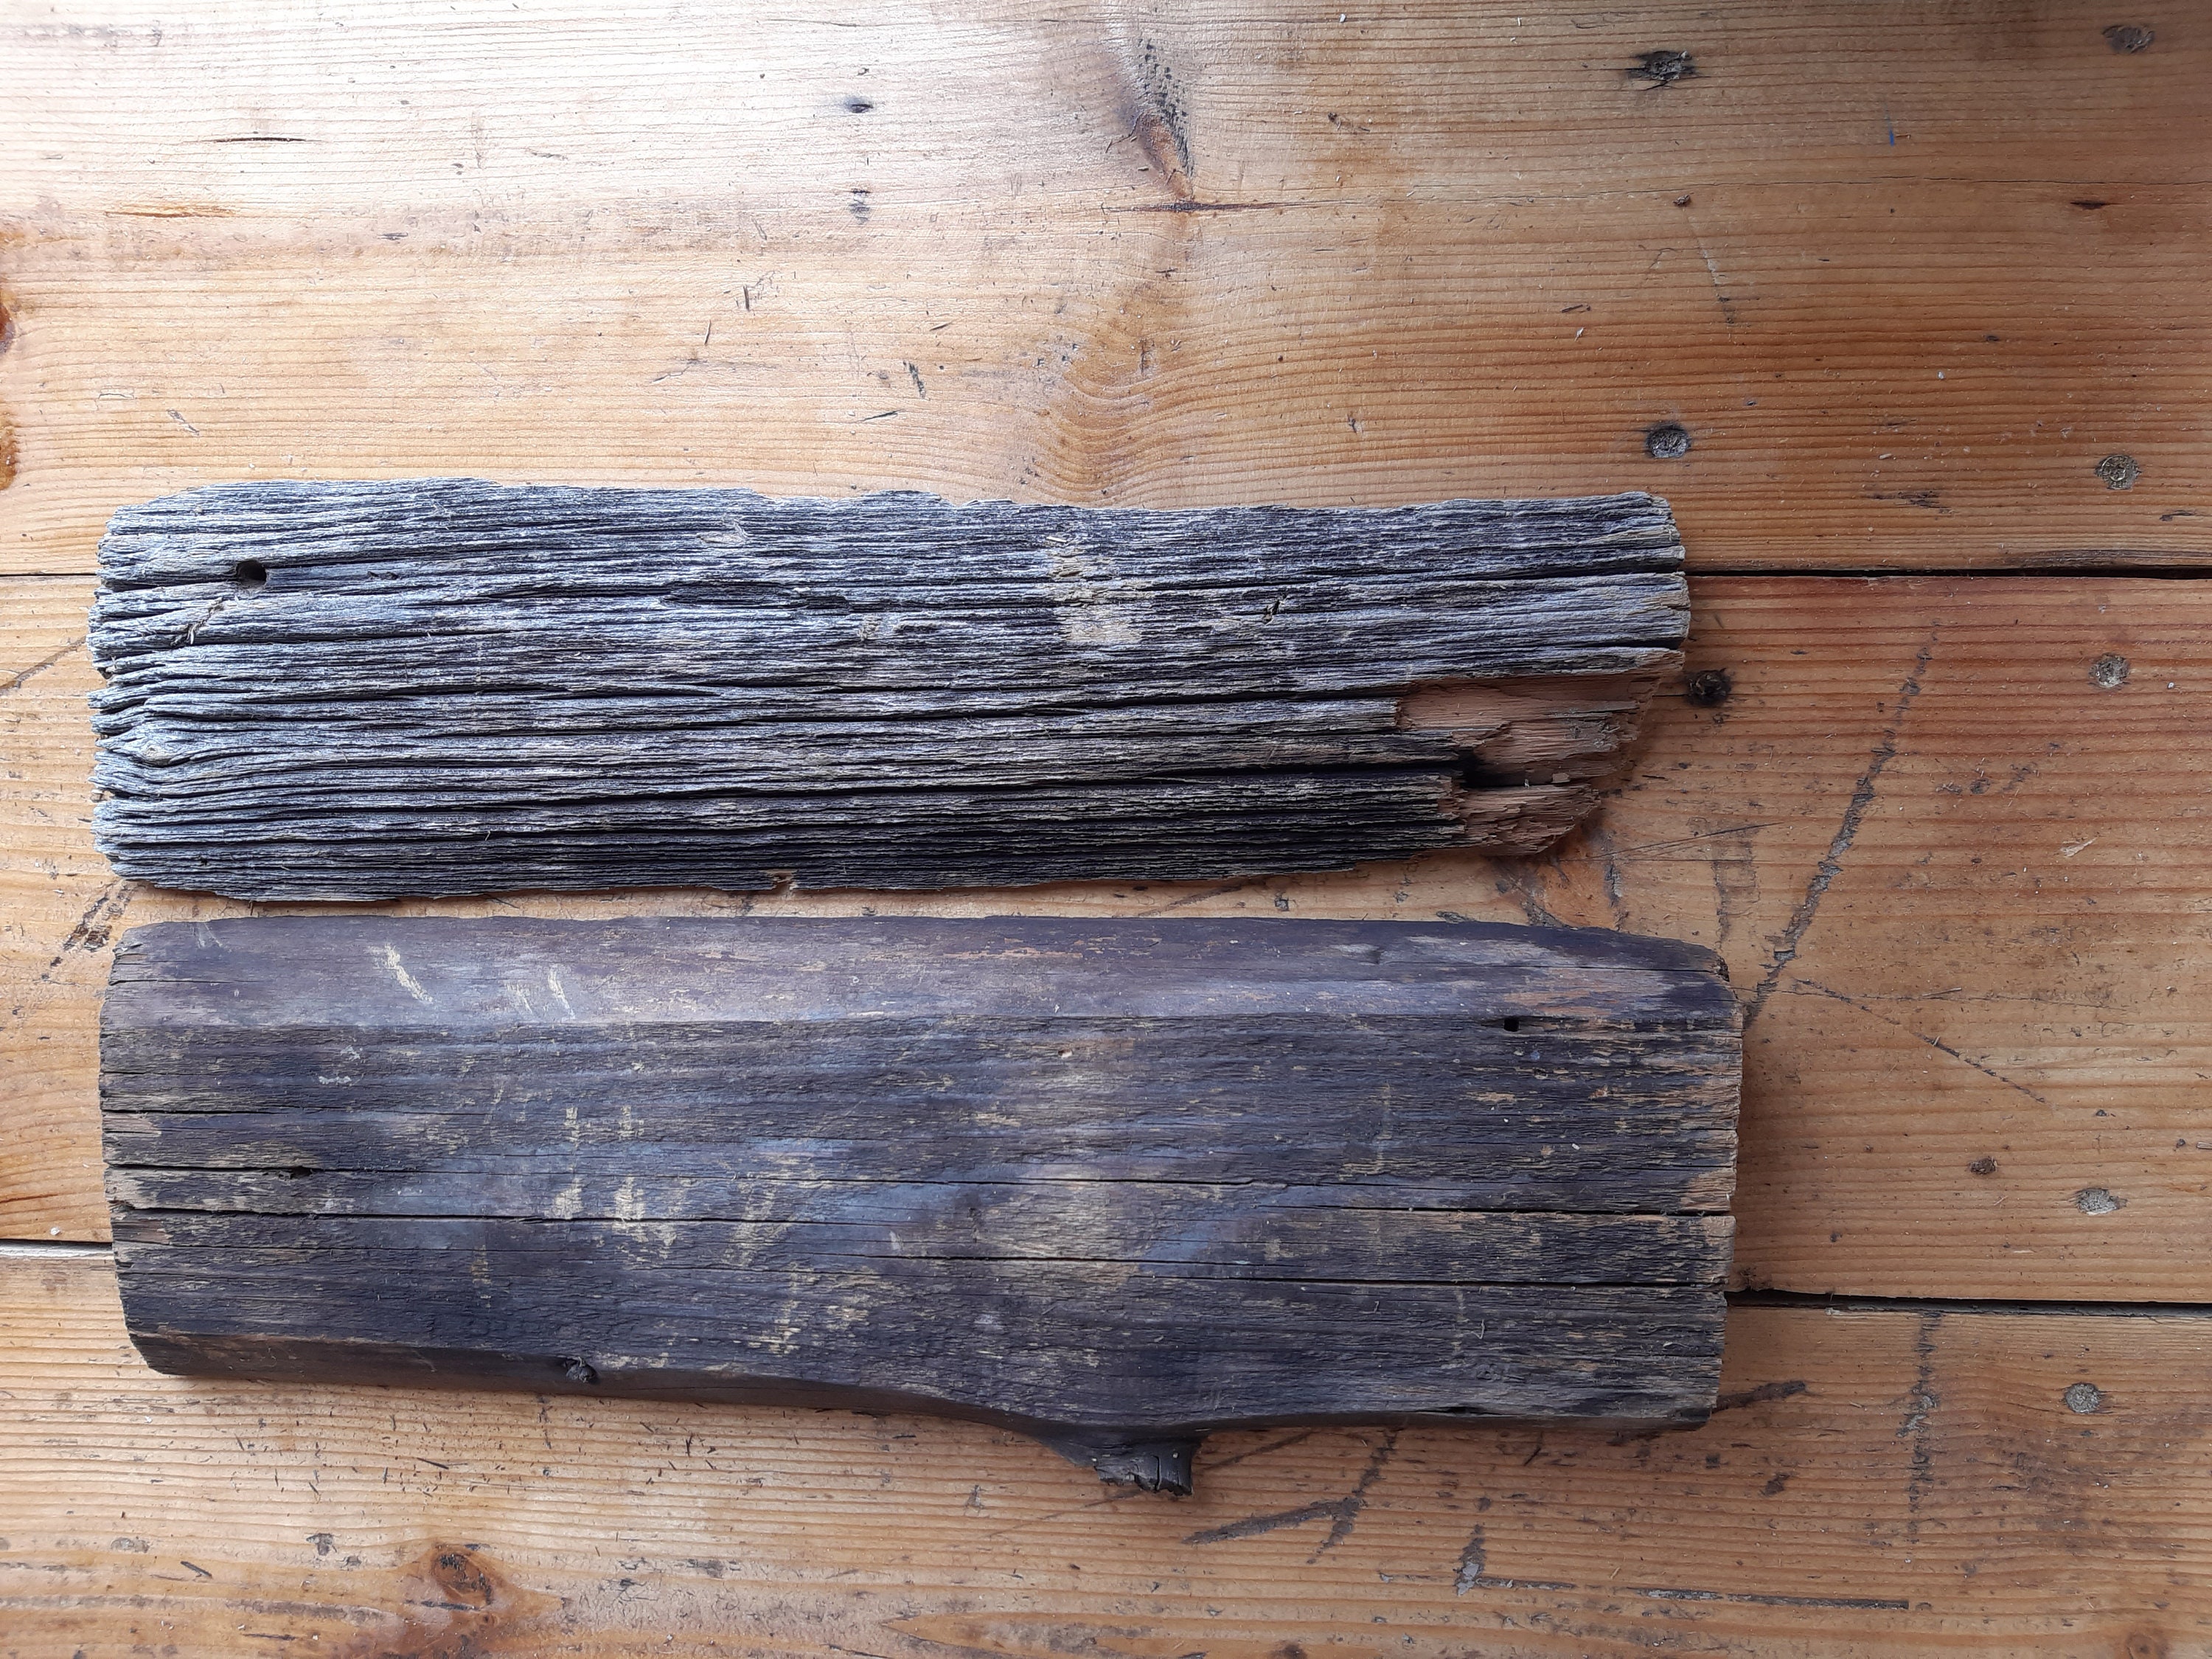 Set of 2 Rustic Wooden Planks, Reclaimed Wood, Raw Wood With Bark, Wooden  Board, Wood Diy Project, Wooden Material, Wood Plank With Bark 